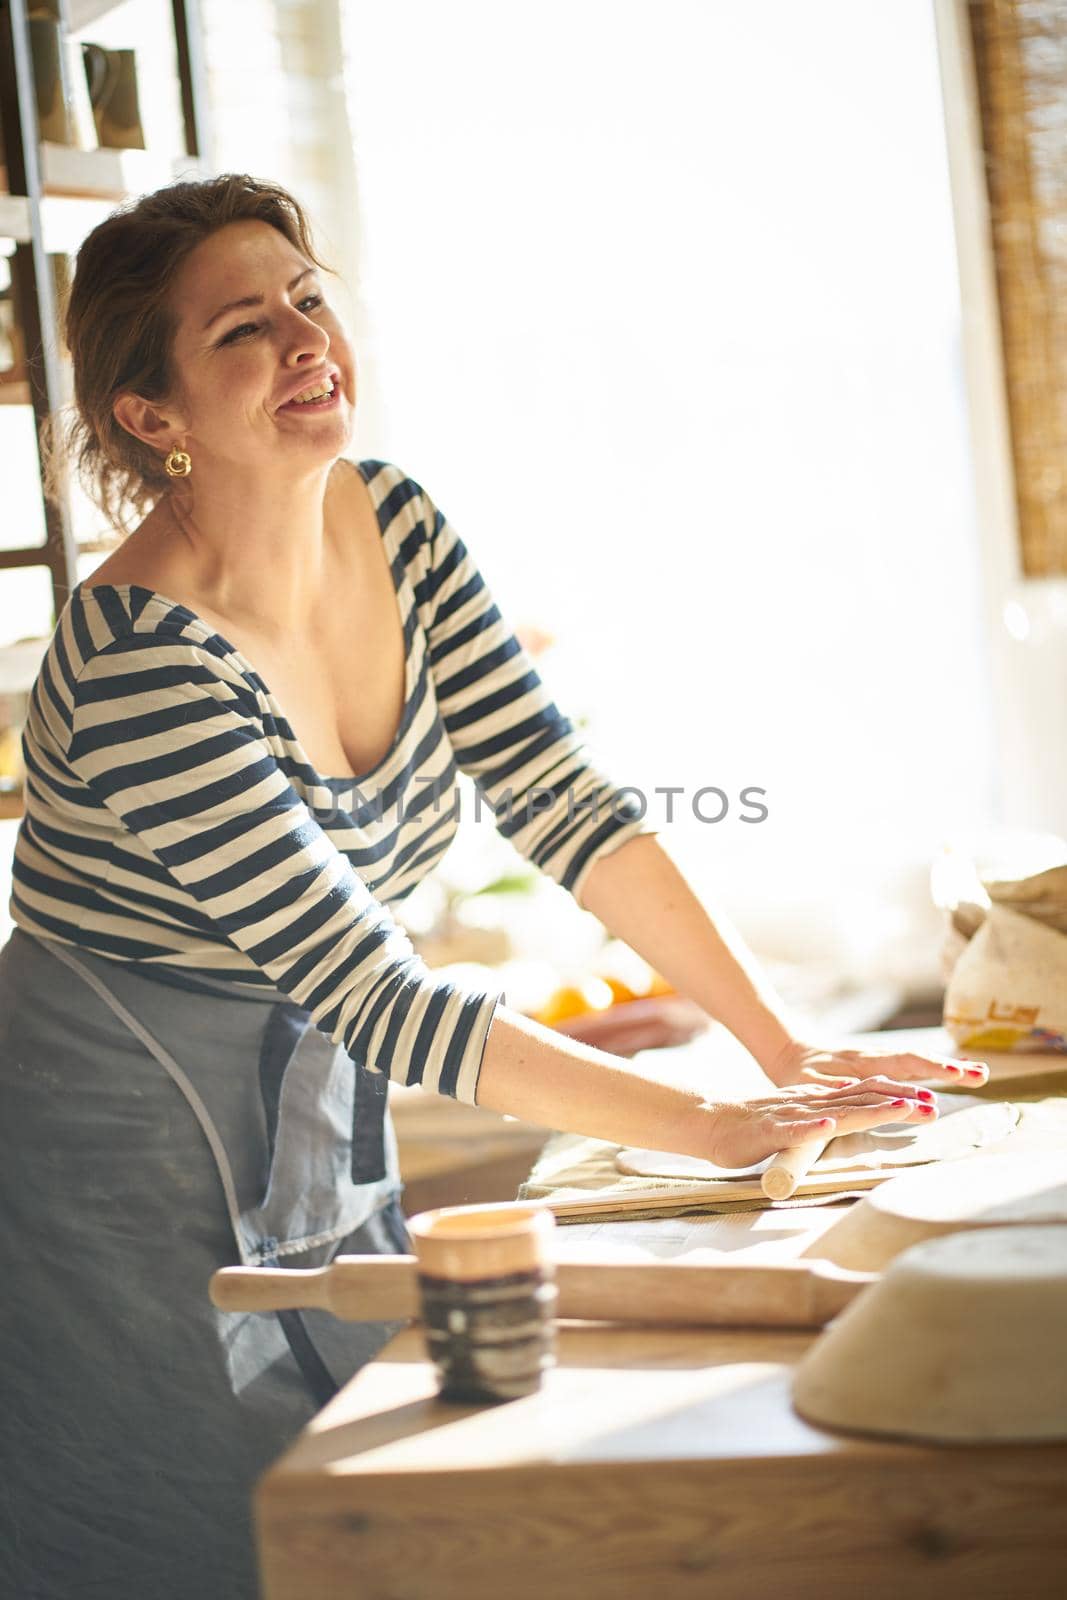 Beautiful happy woman making ceramic ware in workplace, laughing, smiling in sun light. Concept for woman in freelance, business, hobby